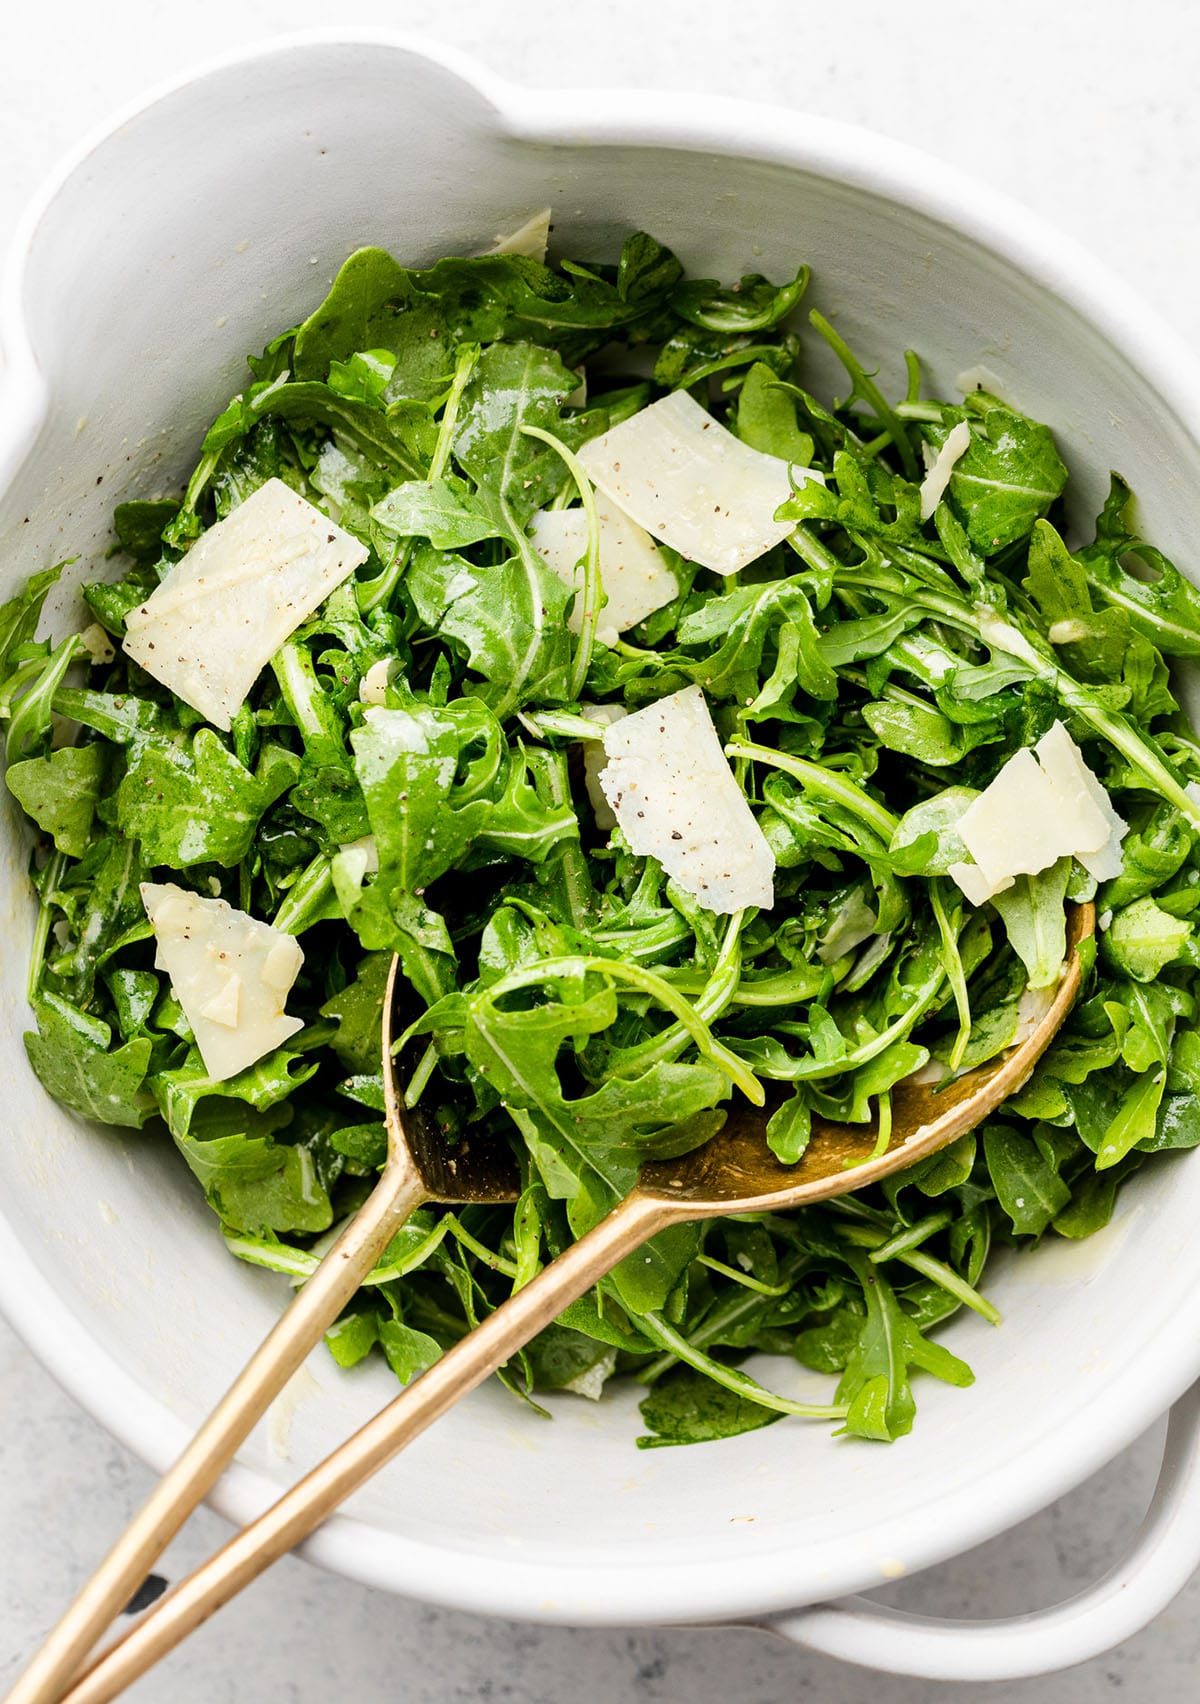 Bronze salad forks lifting a scoop of arugula salad out of a large white bowl.